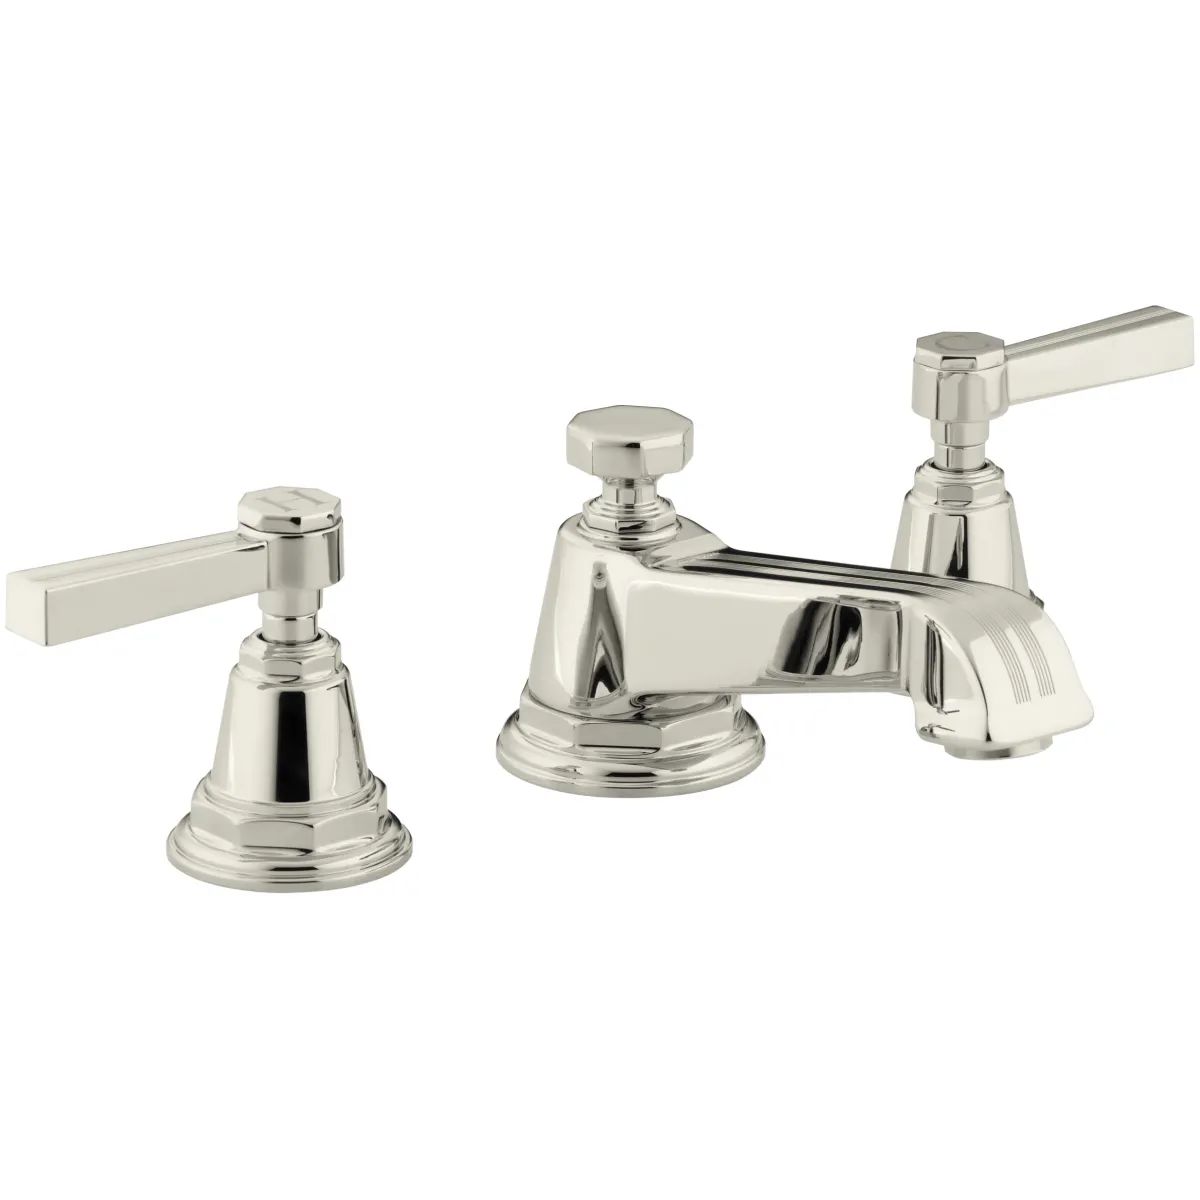 Pinstripe Widespread Bathroom Faucet with Ultra-Glide Valve Technology - Free Metal Pop-Up Drain ... | Build.com, Inc.